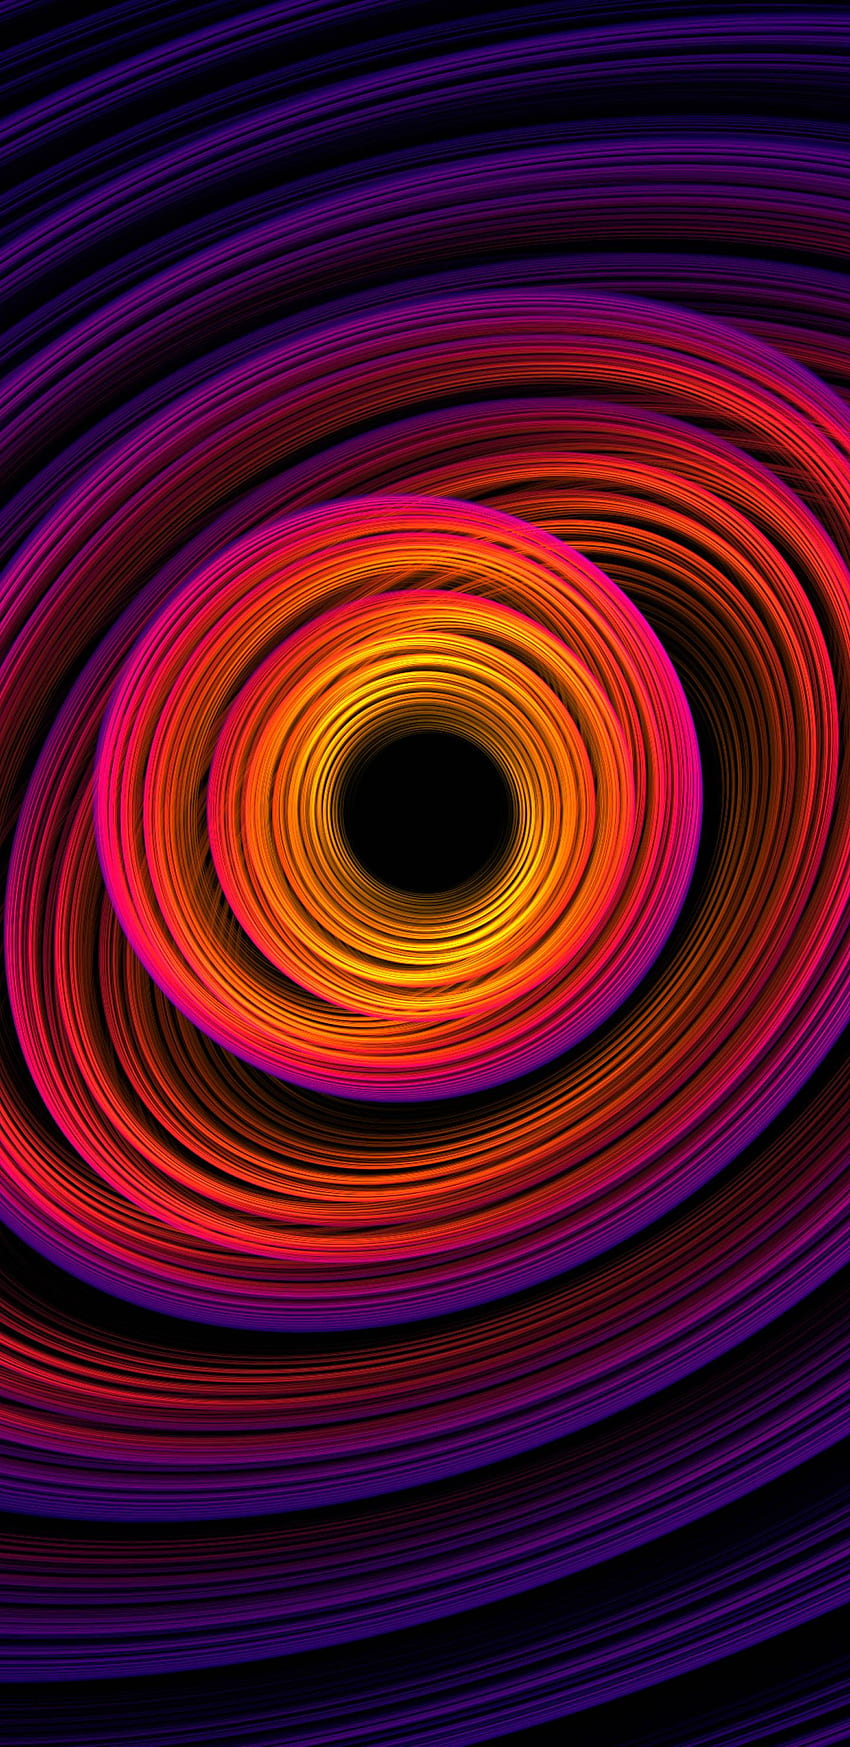 Spiral Shapes Purple Pink Abstract Samsung Galaxy Note 9, 8, S9, S8, SQ, Artist, , and Background, Cool Pink Abstract Tapeta na telefon HD